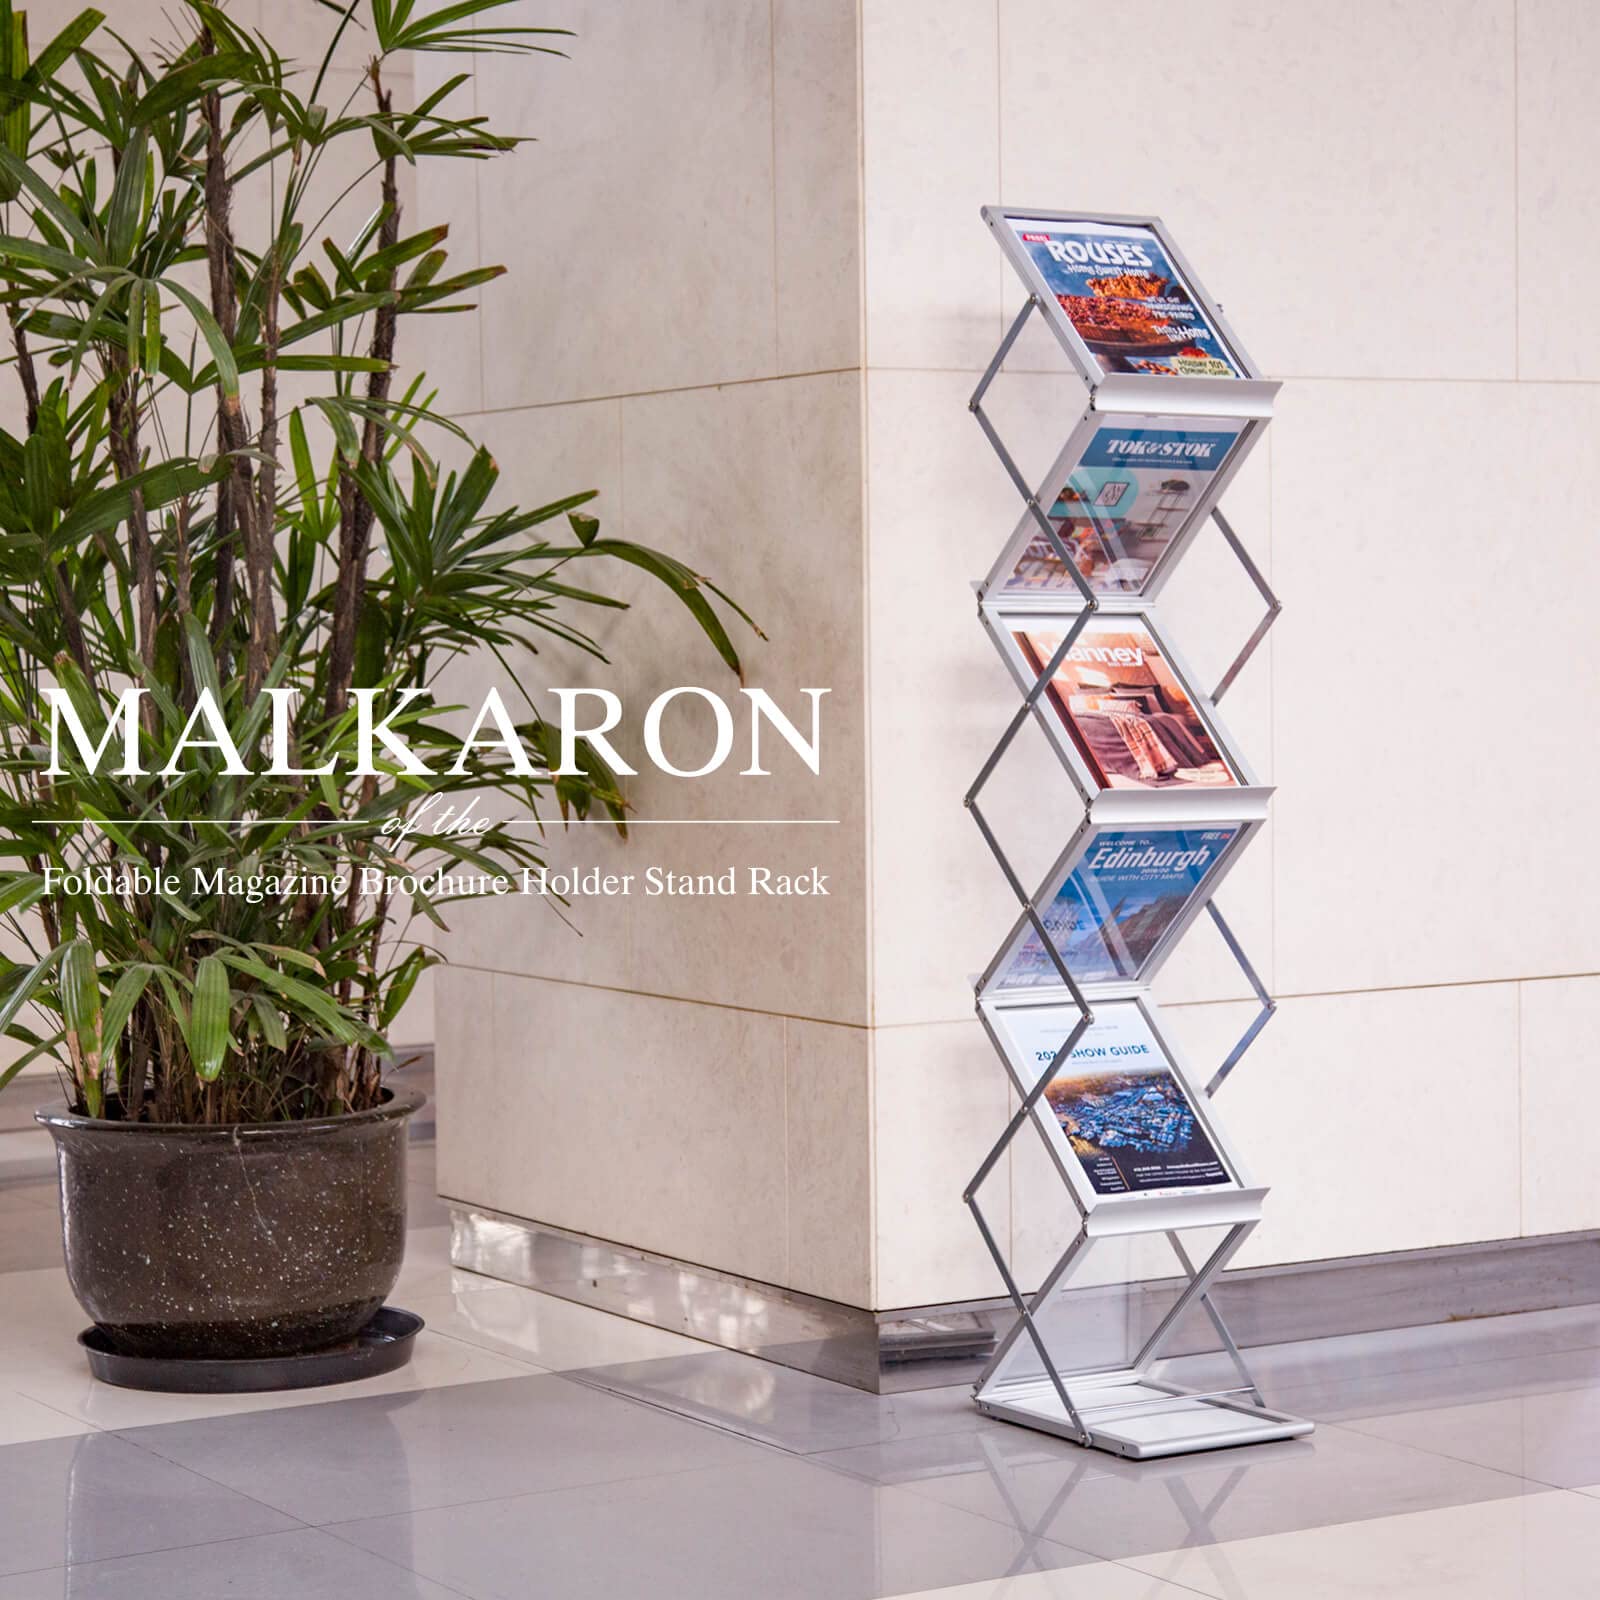 MALKARON Foldable Magazine Rack Brochure Display Stand Holder Catalog Literature Display Rack with Portable Oxford Carrying Bag for Office Trade Show Exhibitions Retail Store (6 Pockets Silver)